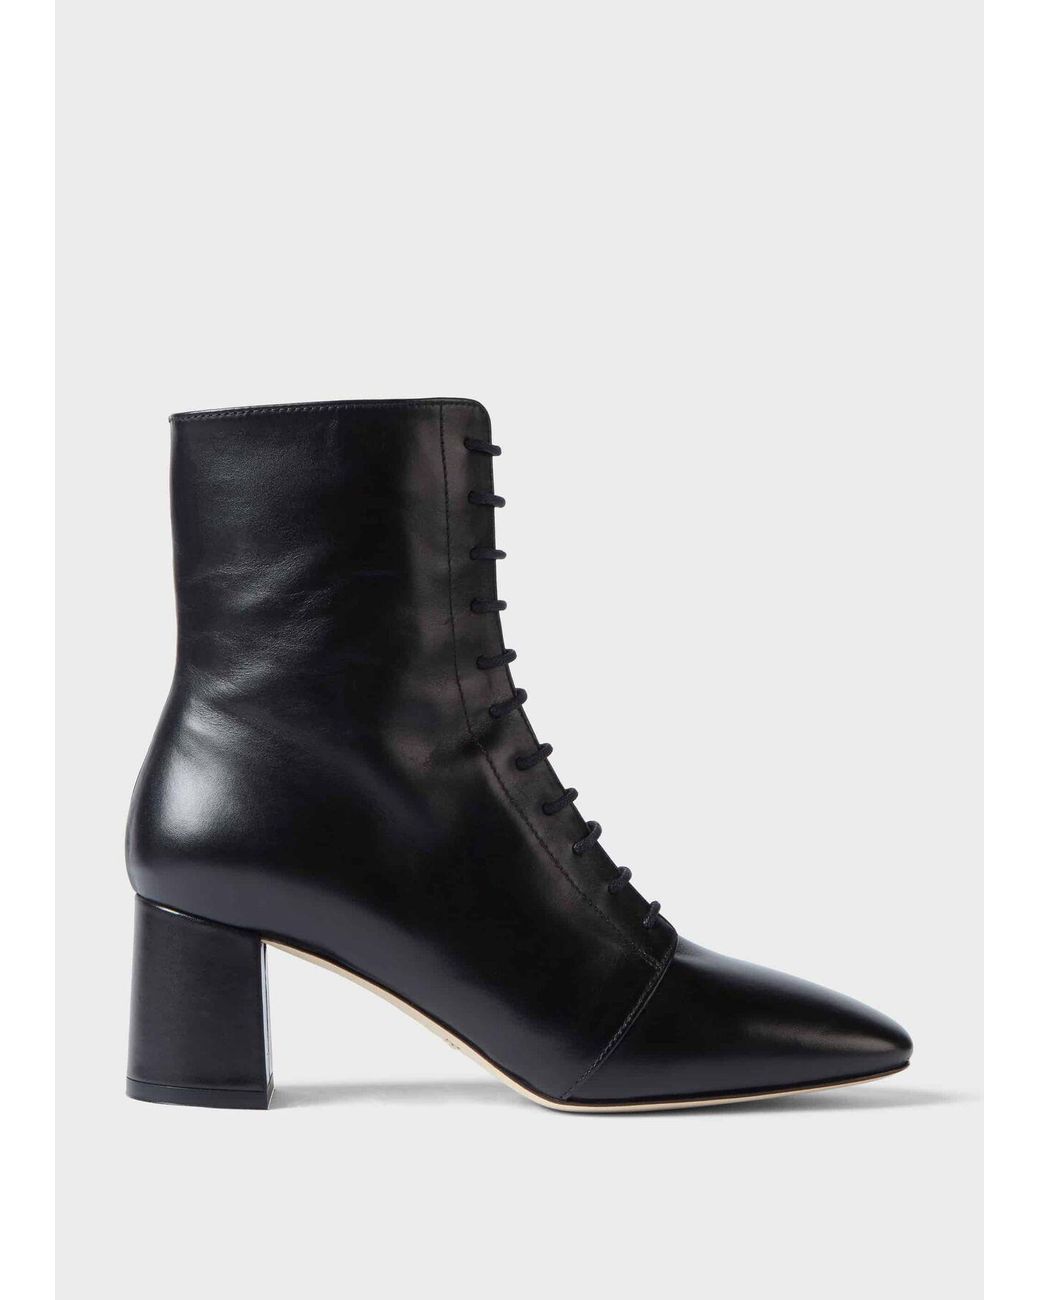 Hobbs Imogen Leather Lace Up Ankle Boots in Black - Lyst